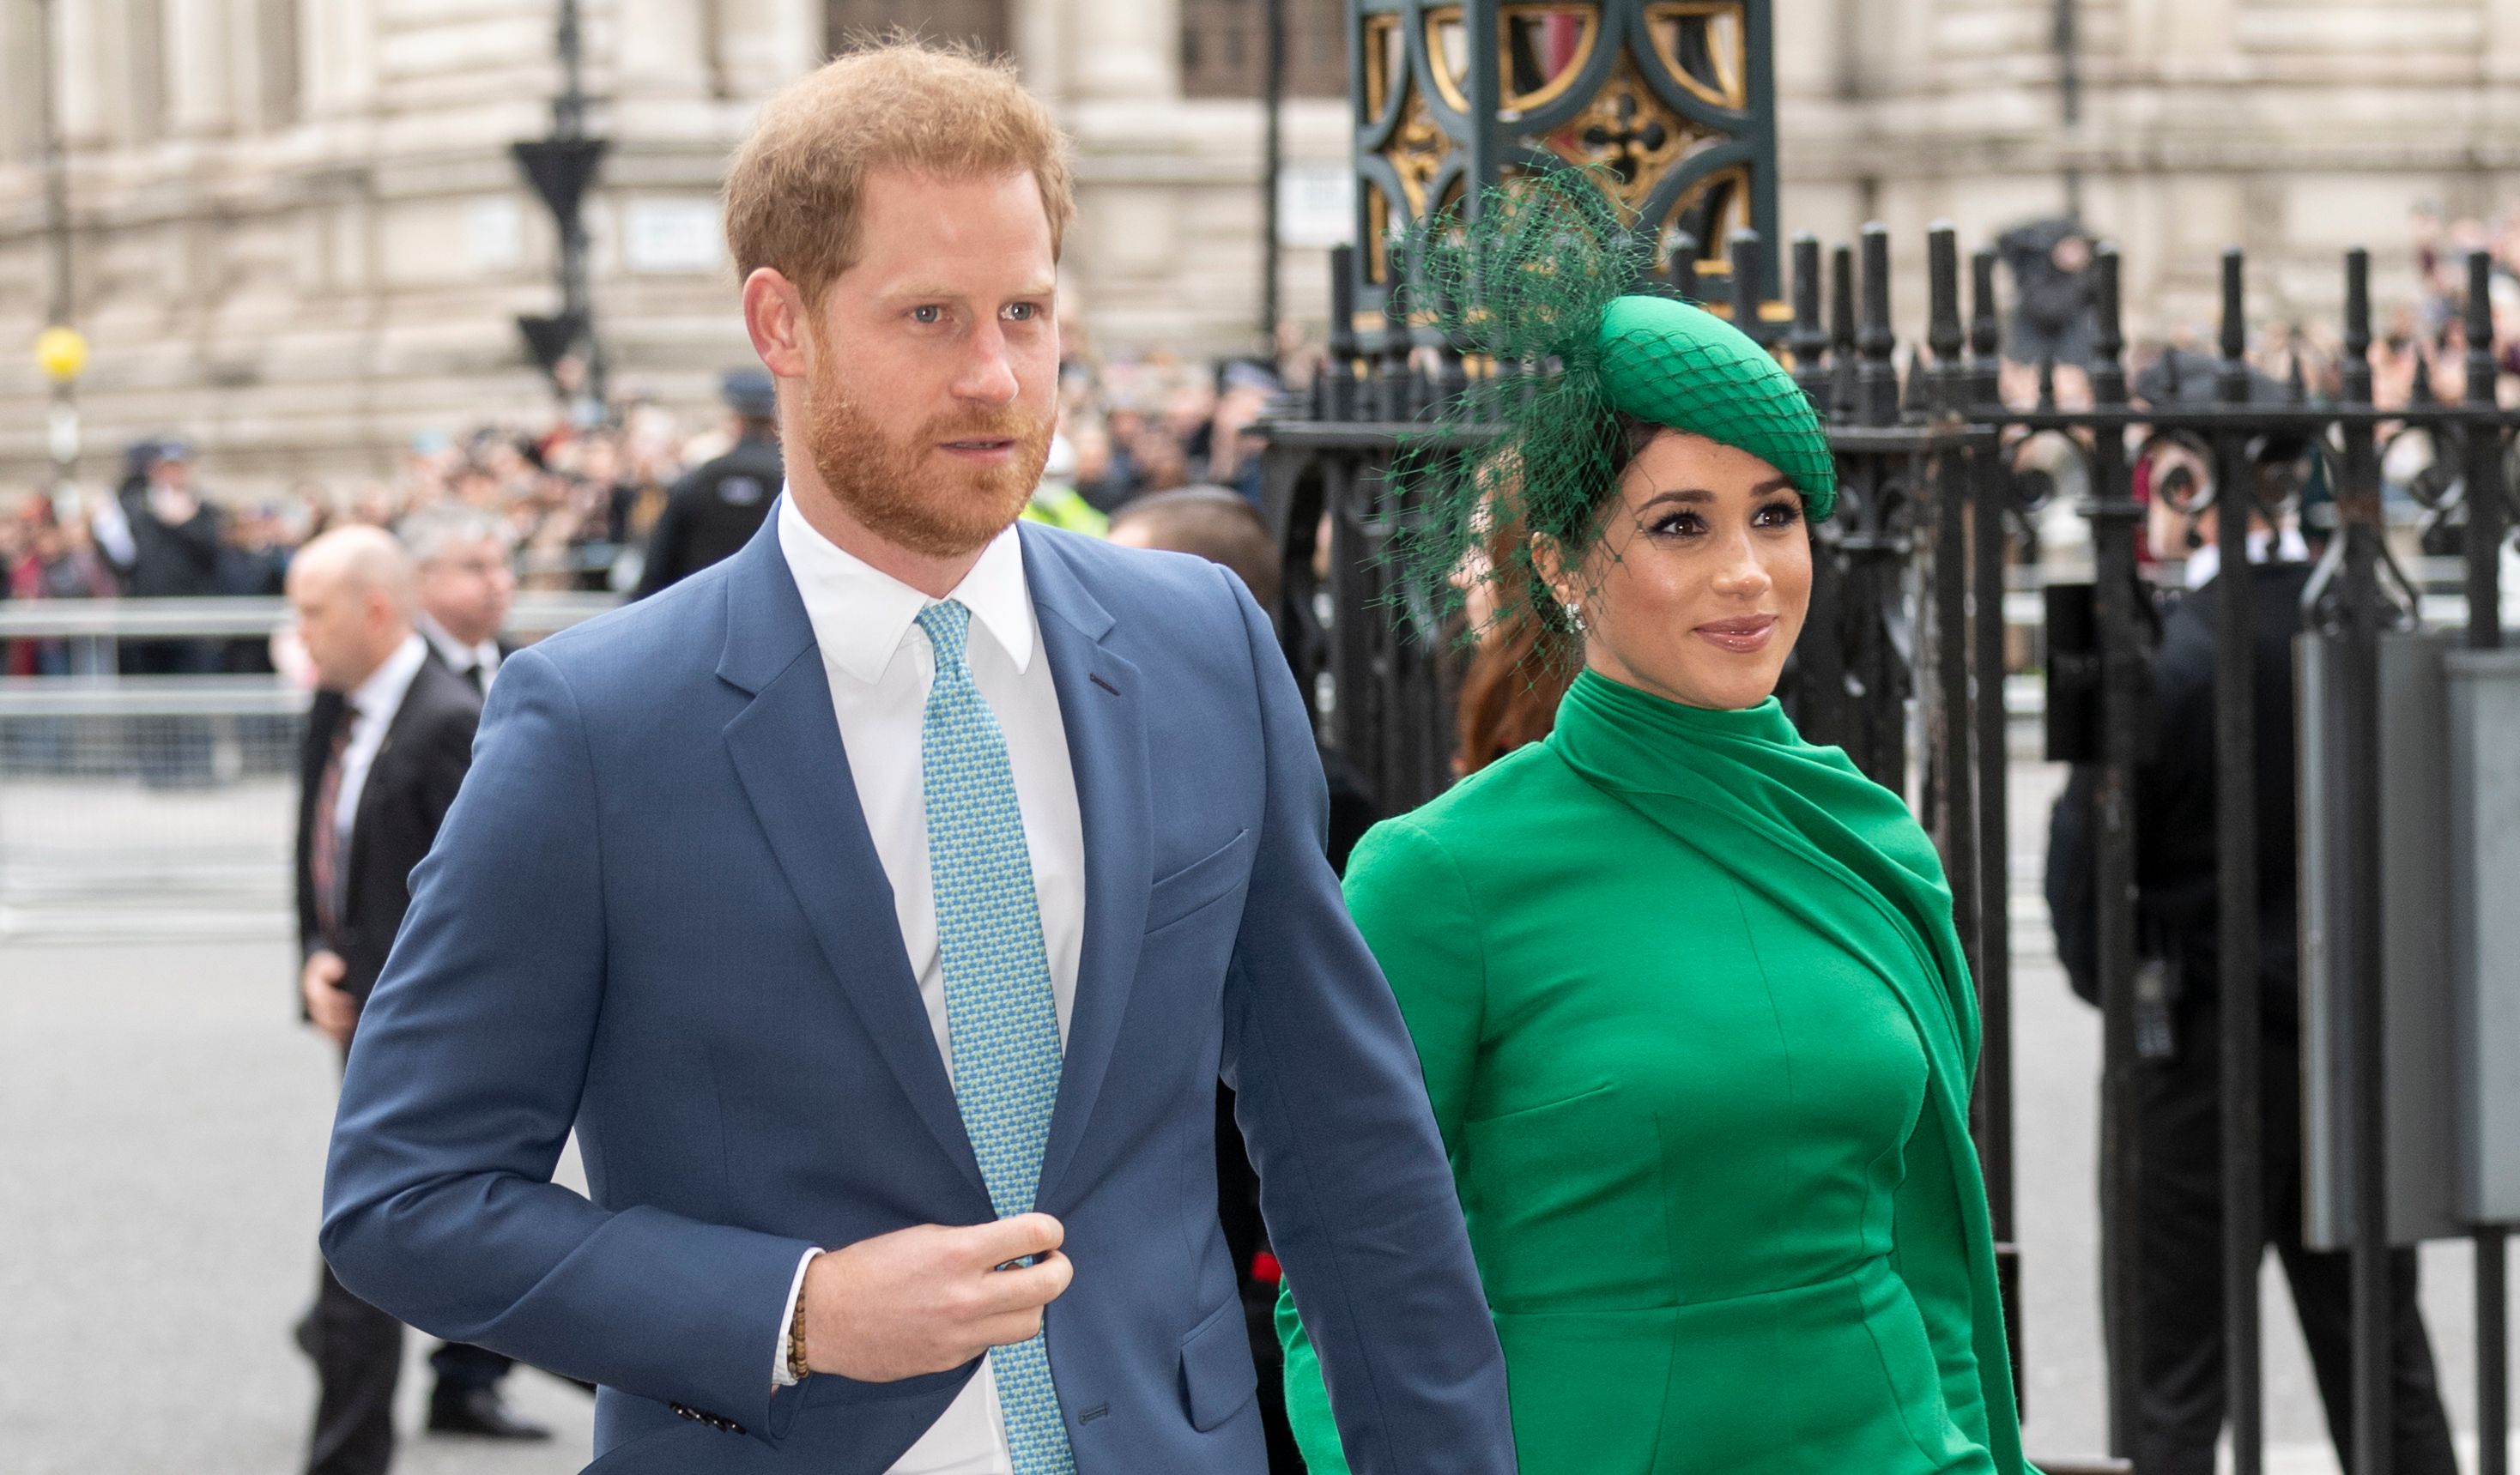 Prince Harry and Meghan Markle at the Commonwealth Day Service 2020 at Westminster Abbey on March 9, 2020 | Photo: Getty Images